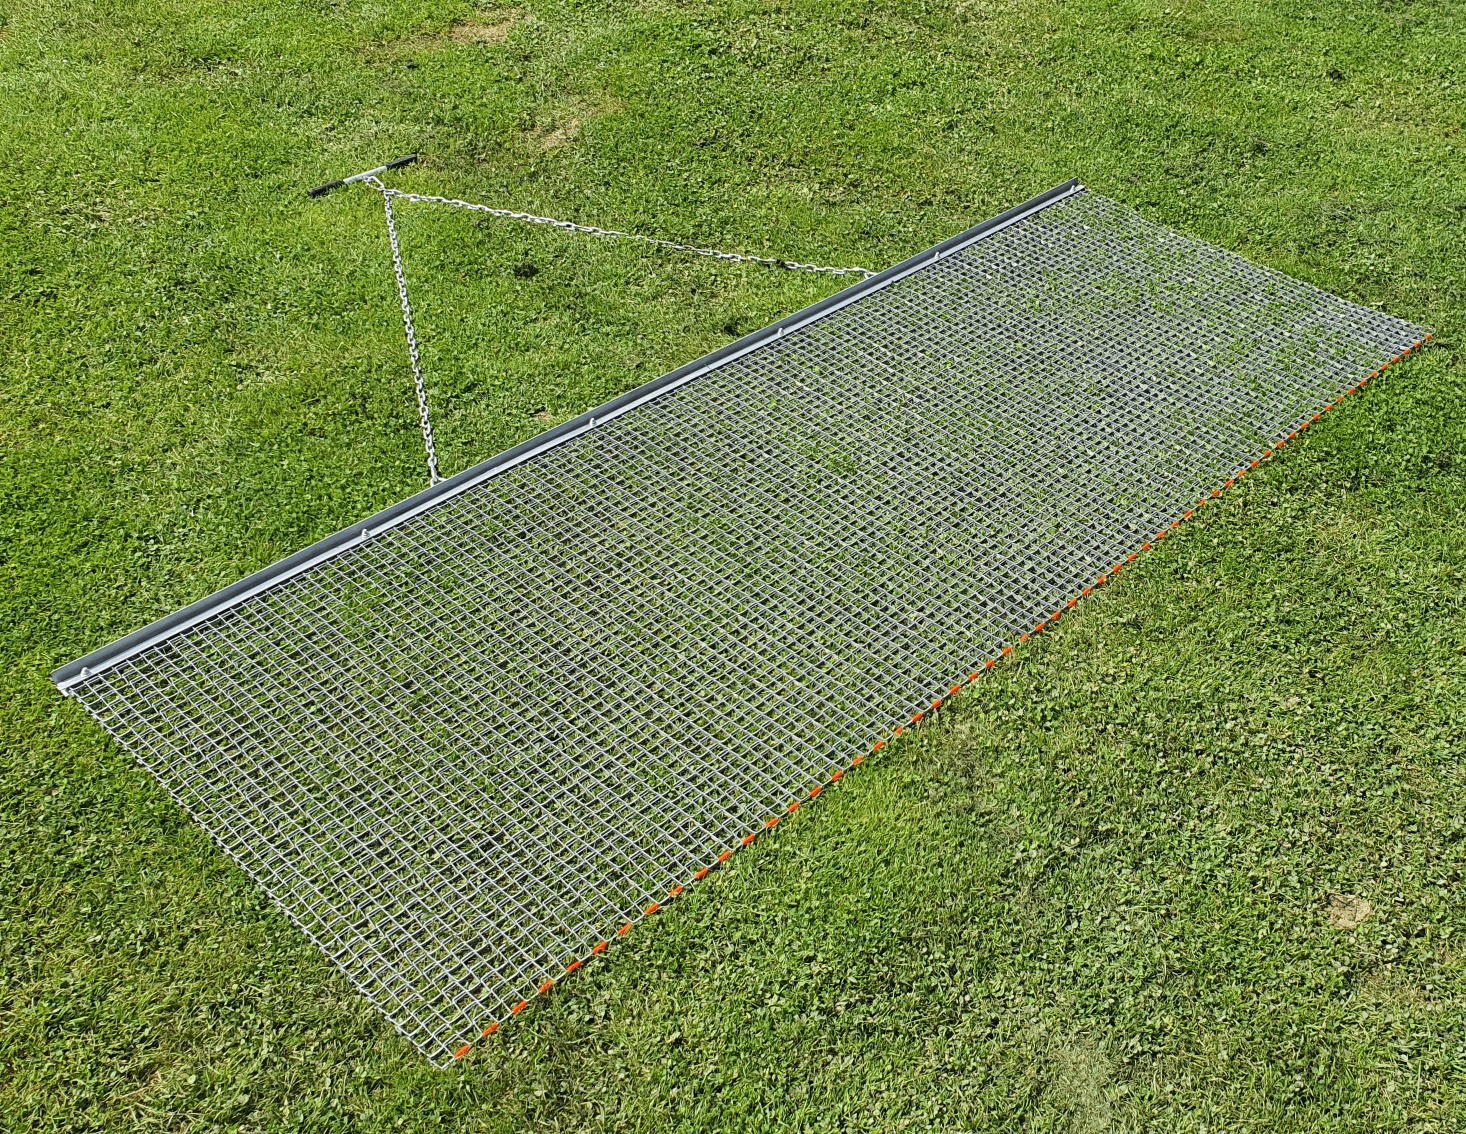 Super-Size Galvanized Steel Drag Mat for Leveling Large Areas (10' x 4')